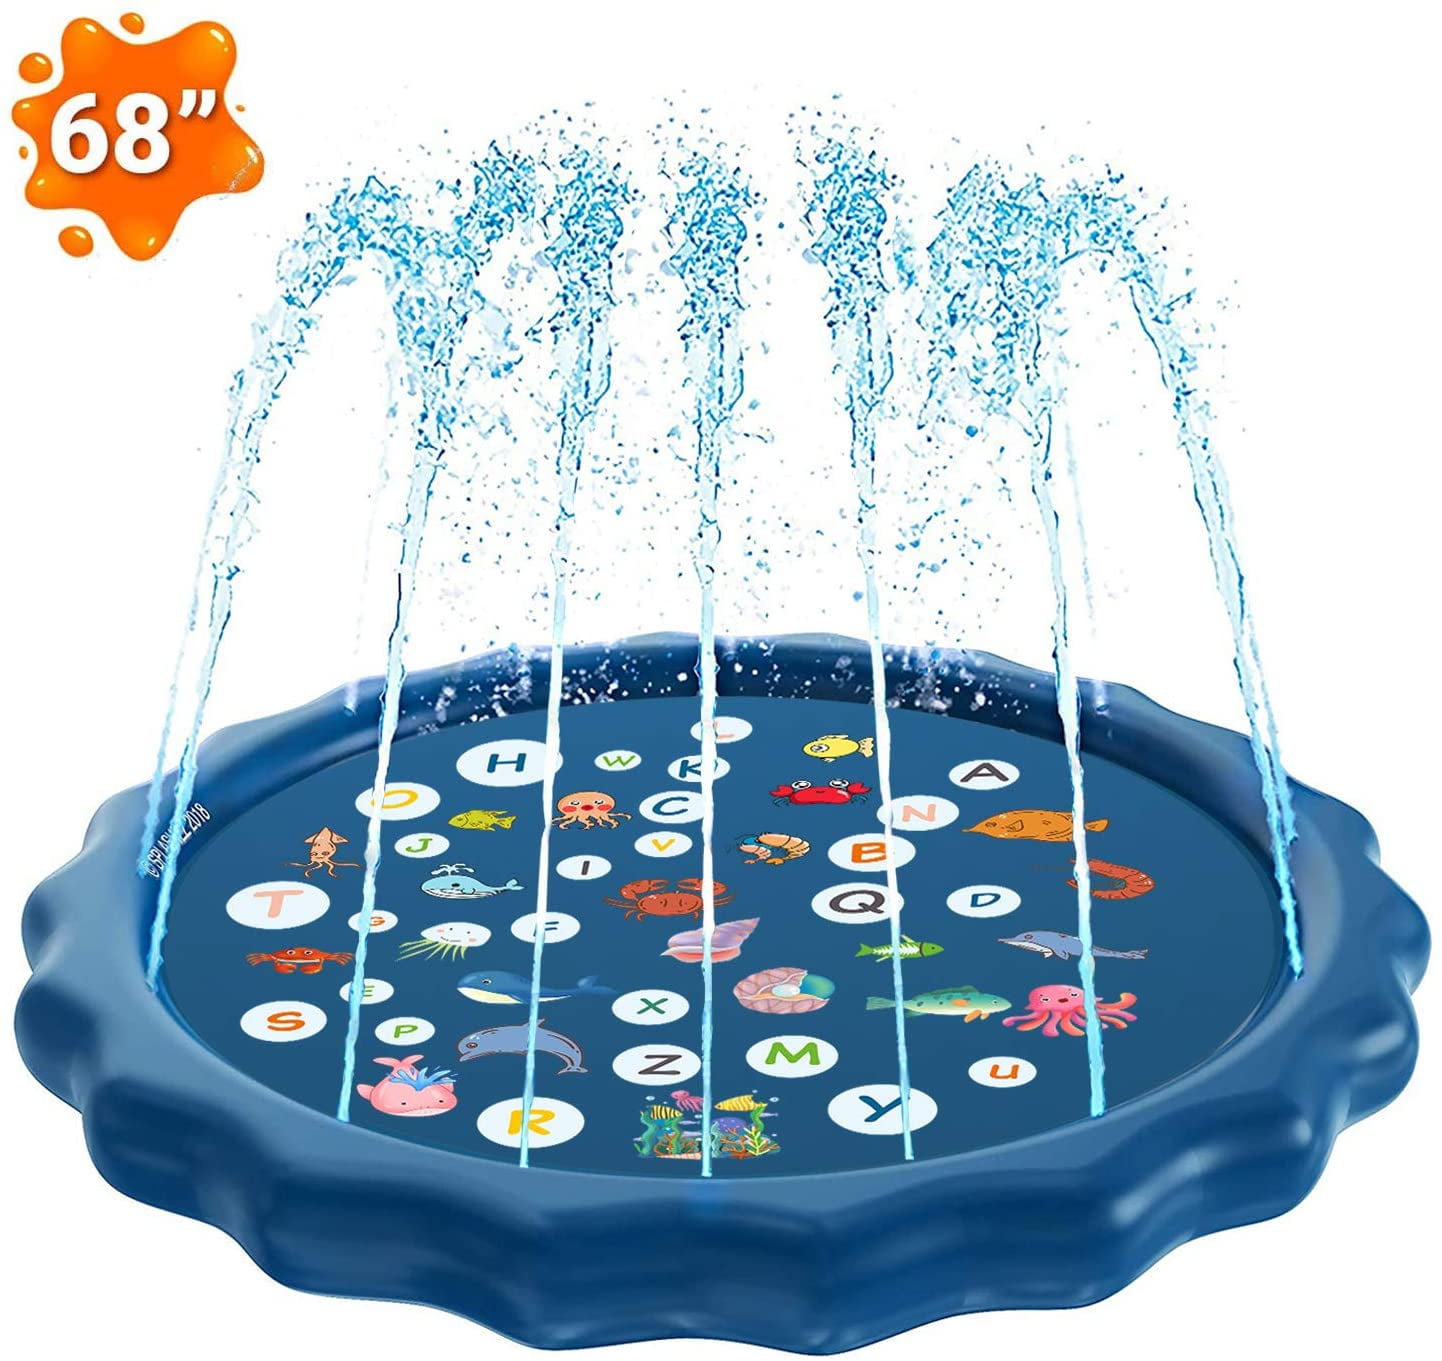 Splash Pad for Kids Upgraded 68 Summer Outdoor Water Toys Sprinkler for Kids Splash Pad Play Mat /& Wading Pool for Fun Games Learning Party 1-12 Years Old Boys Girls